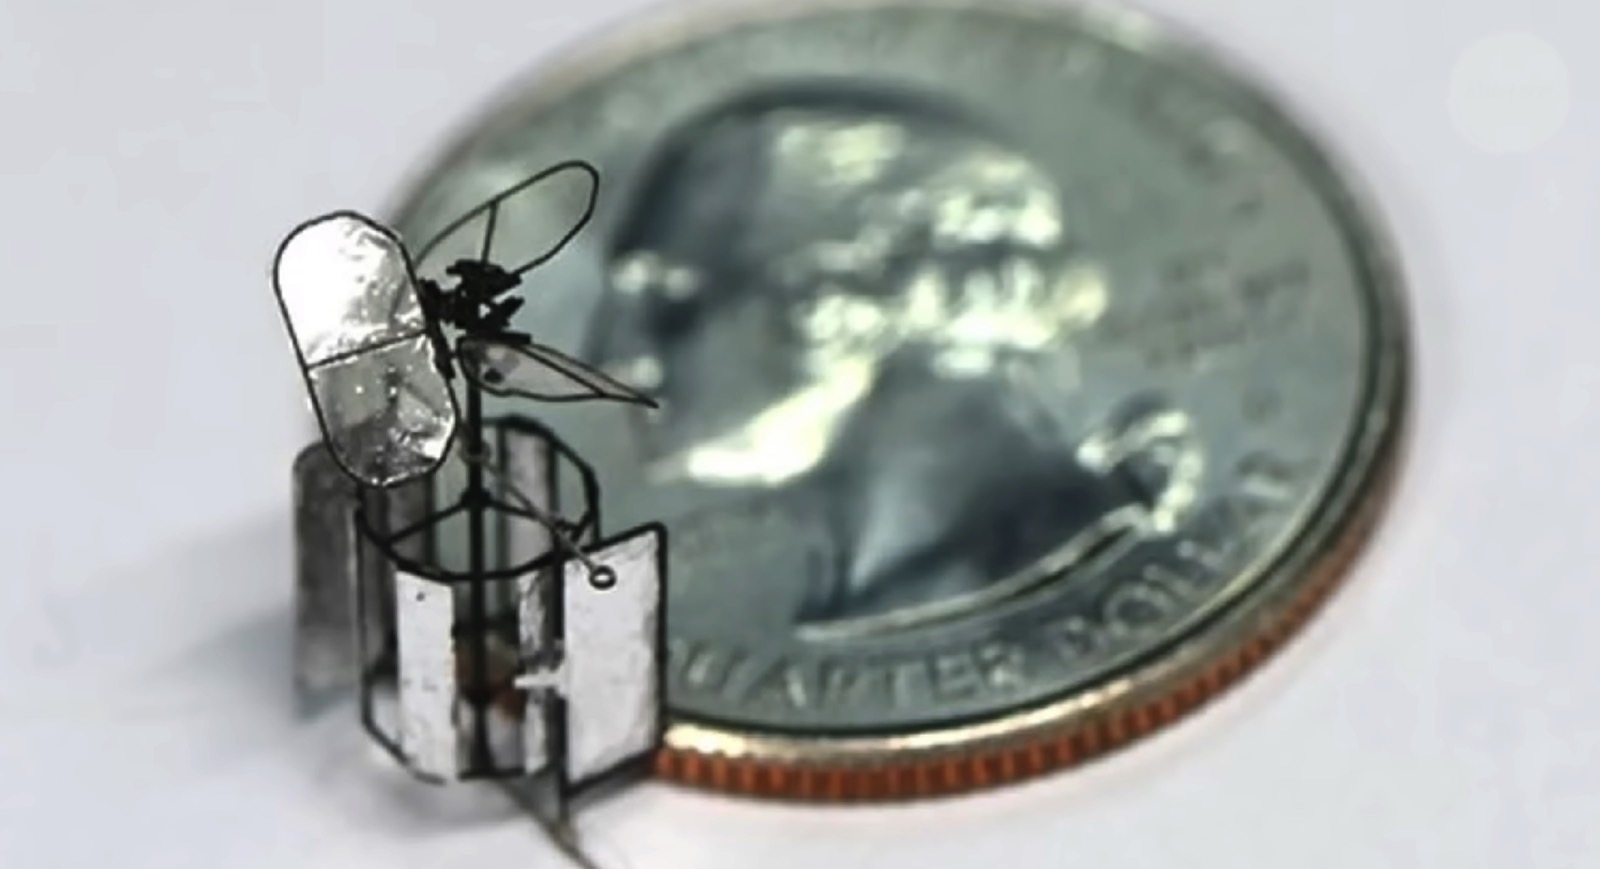 The bug-sized version of the drone.